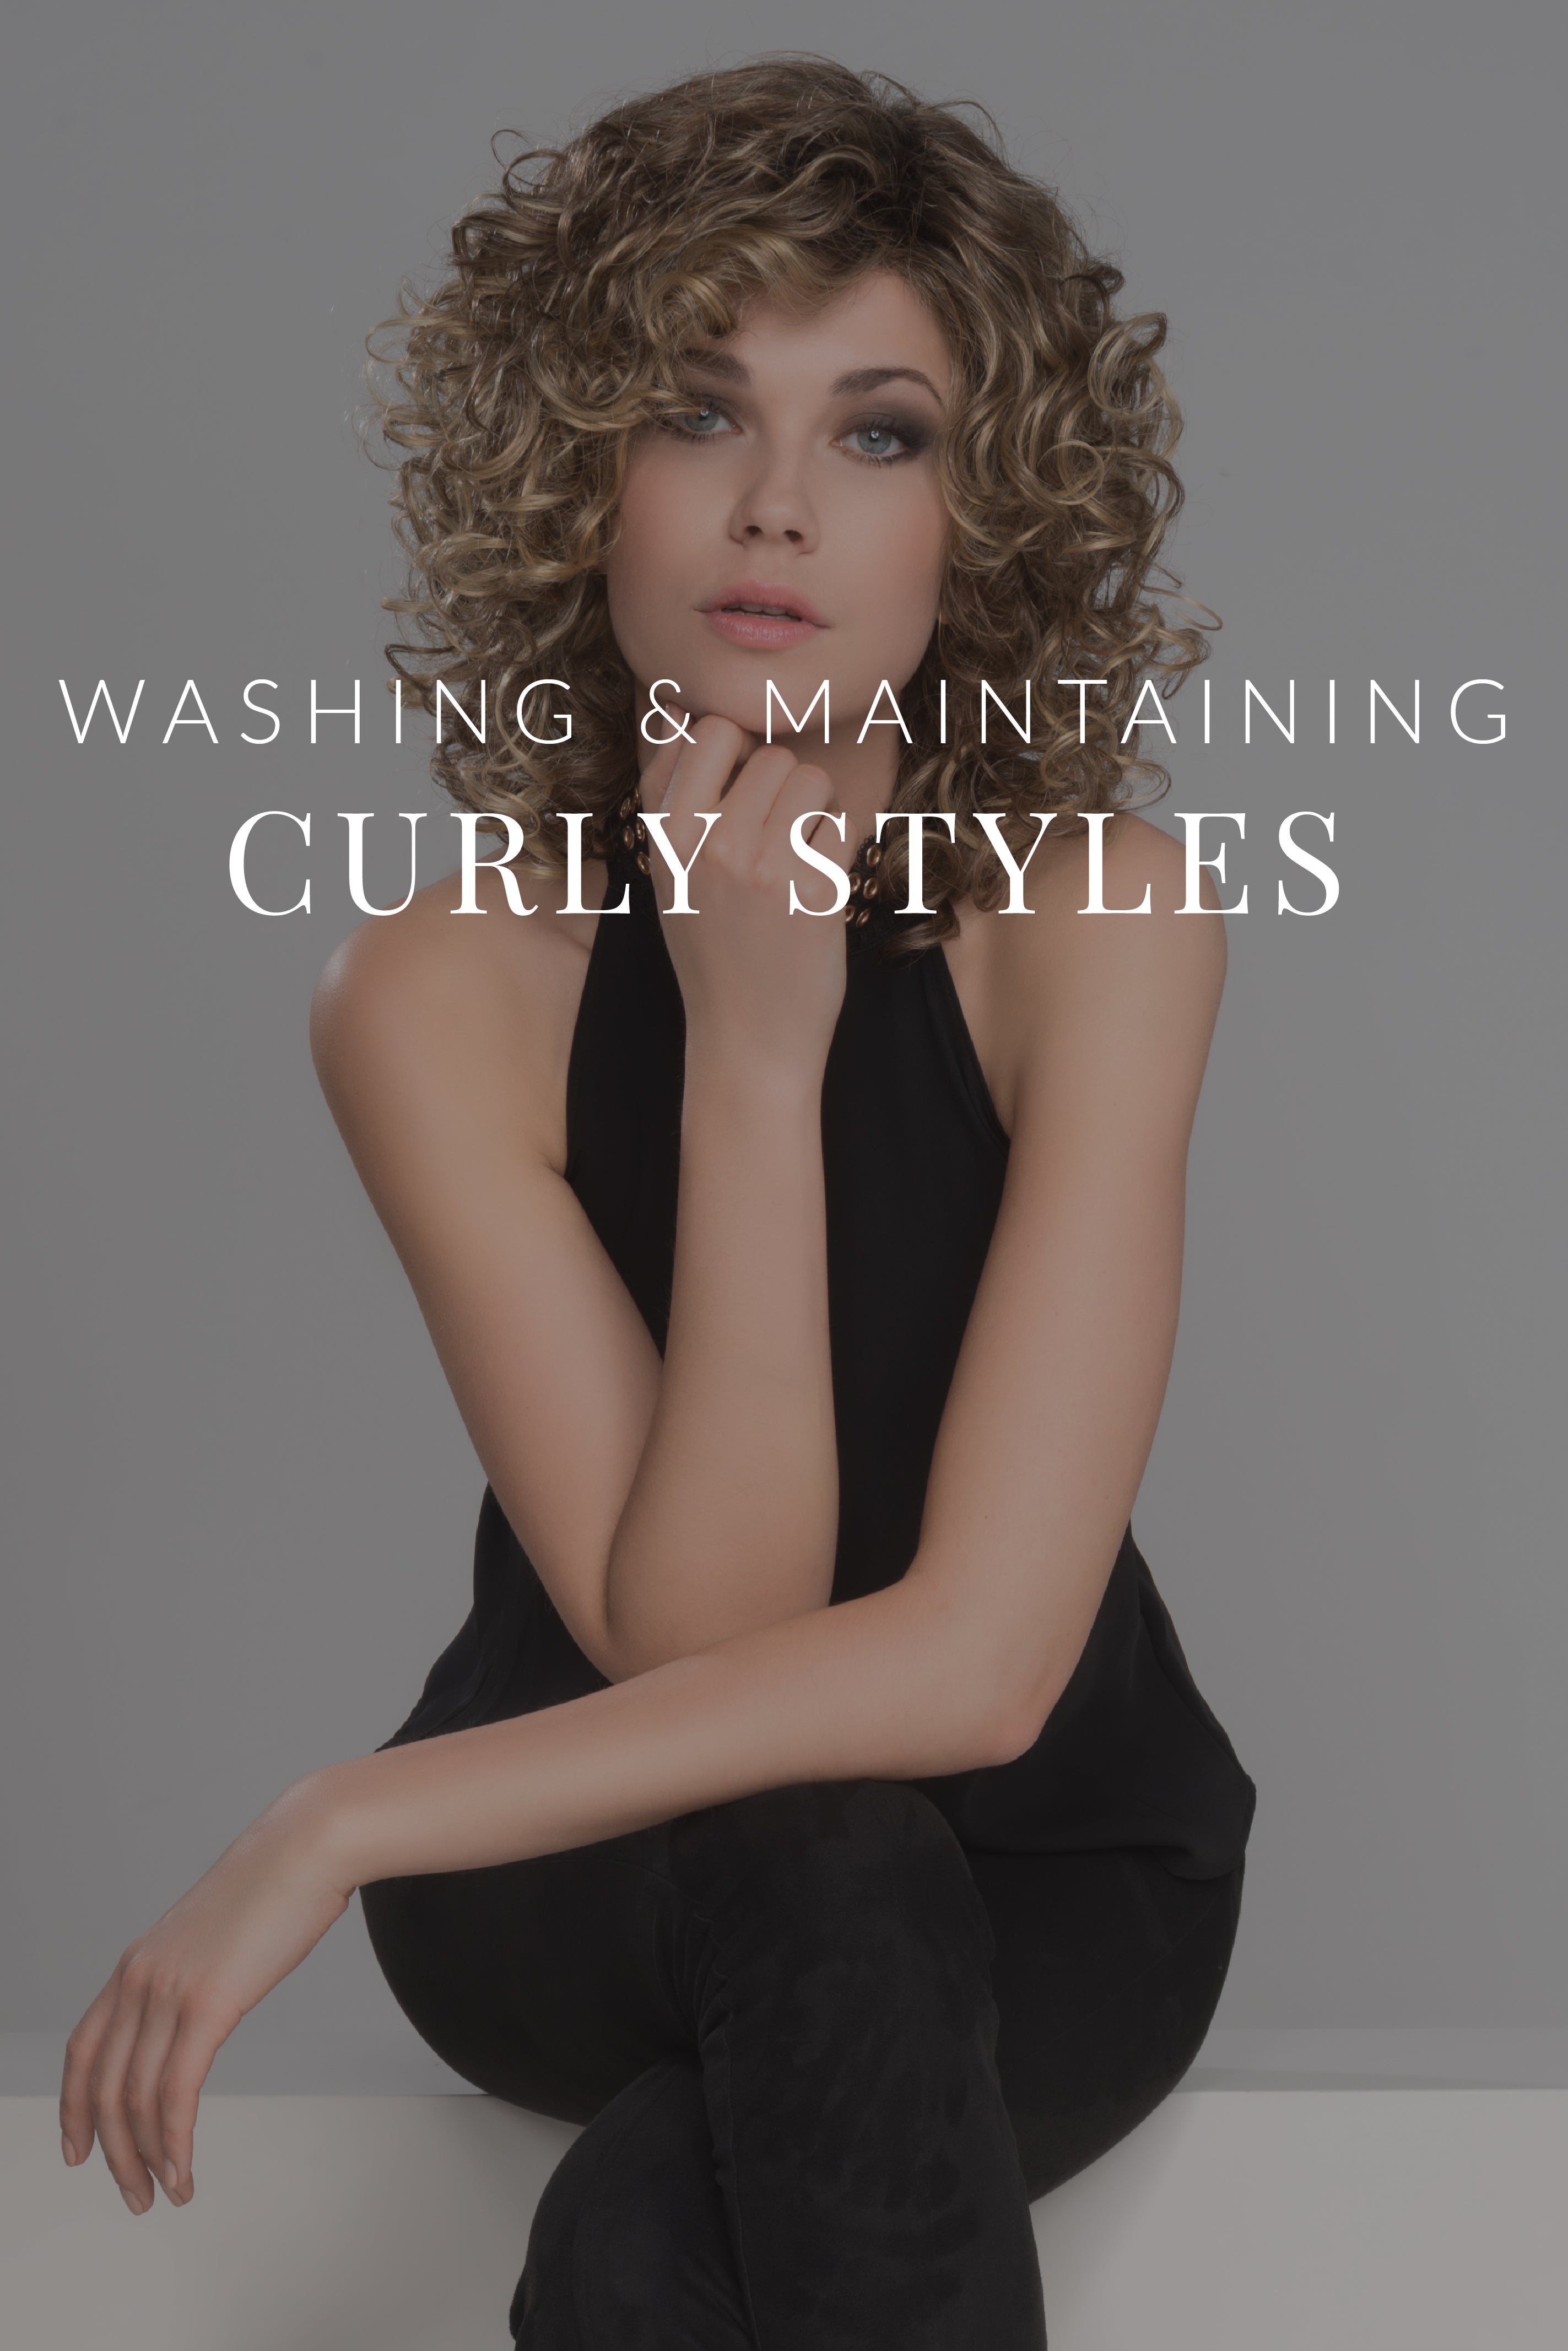 How To Wash and Maintain Curly Synthetic Styles